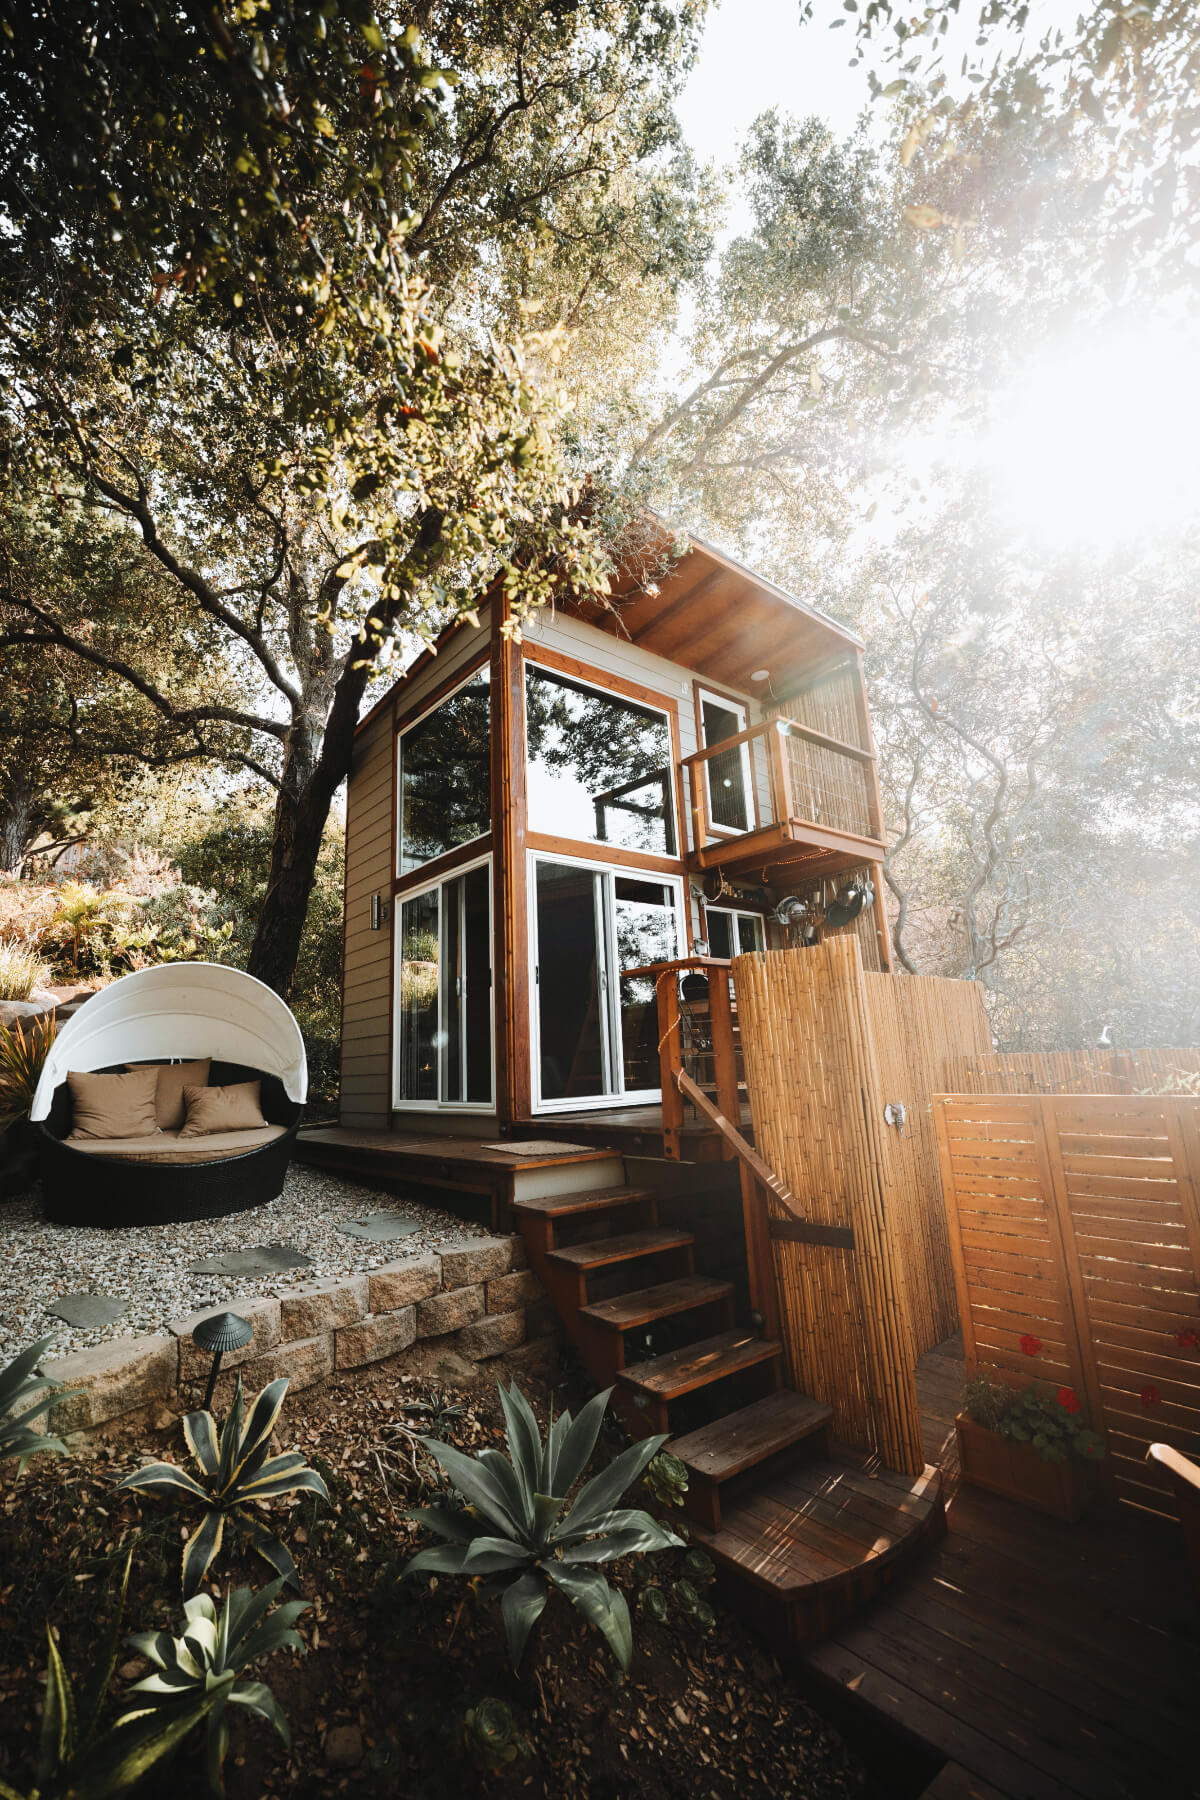 Tiny homes are one of the smallest variety of homes to choose from